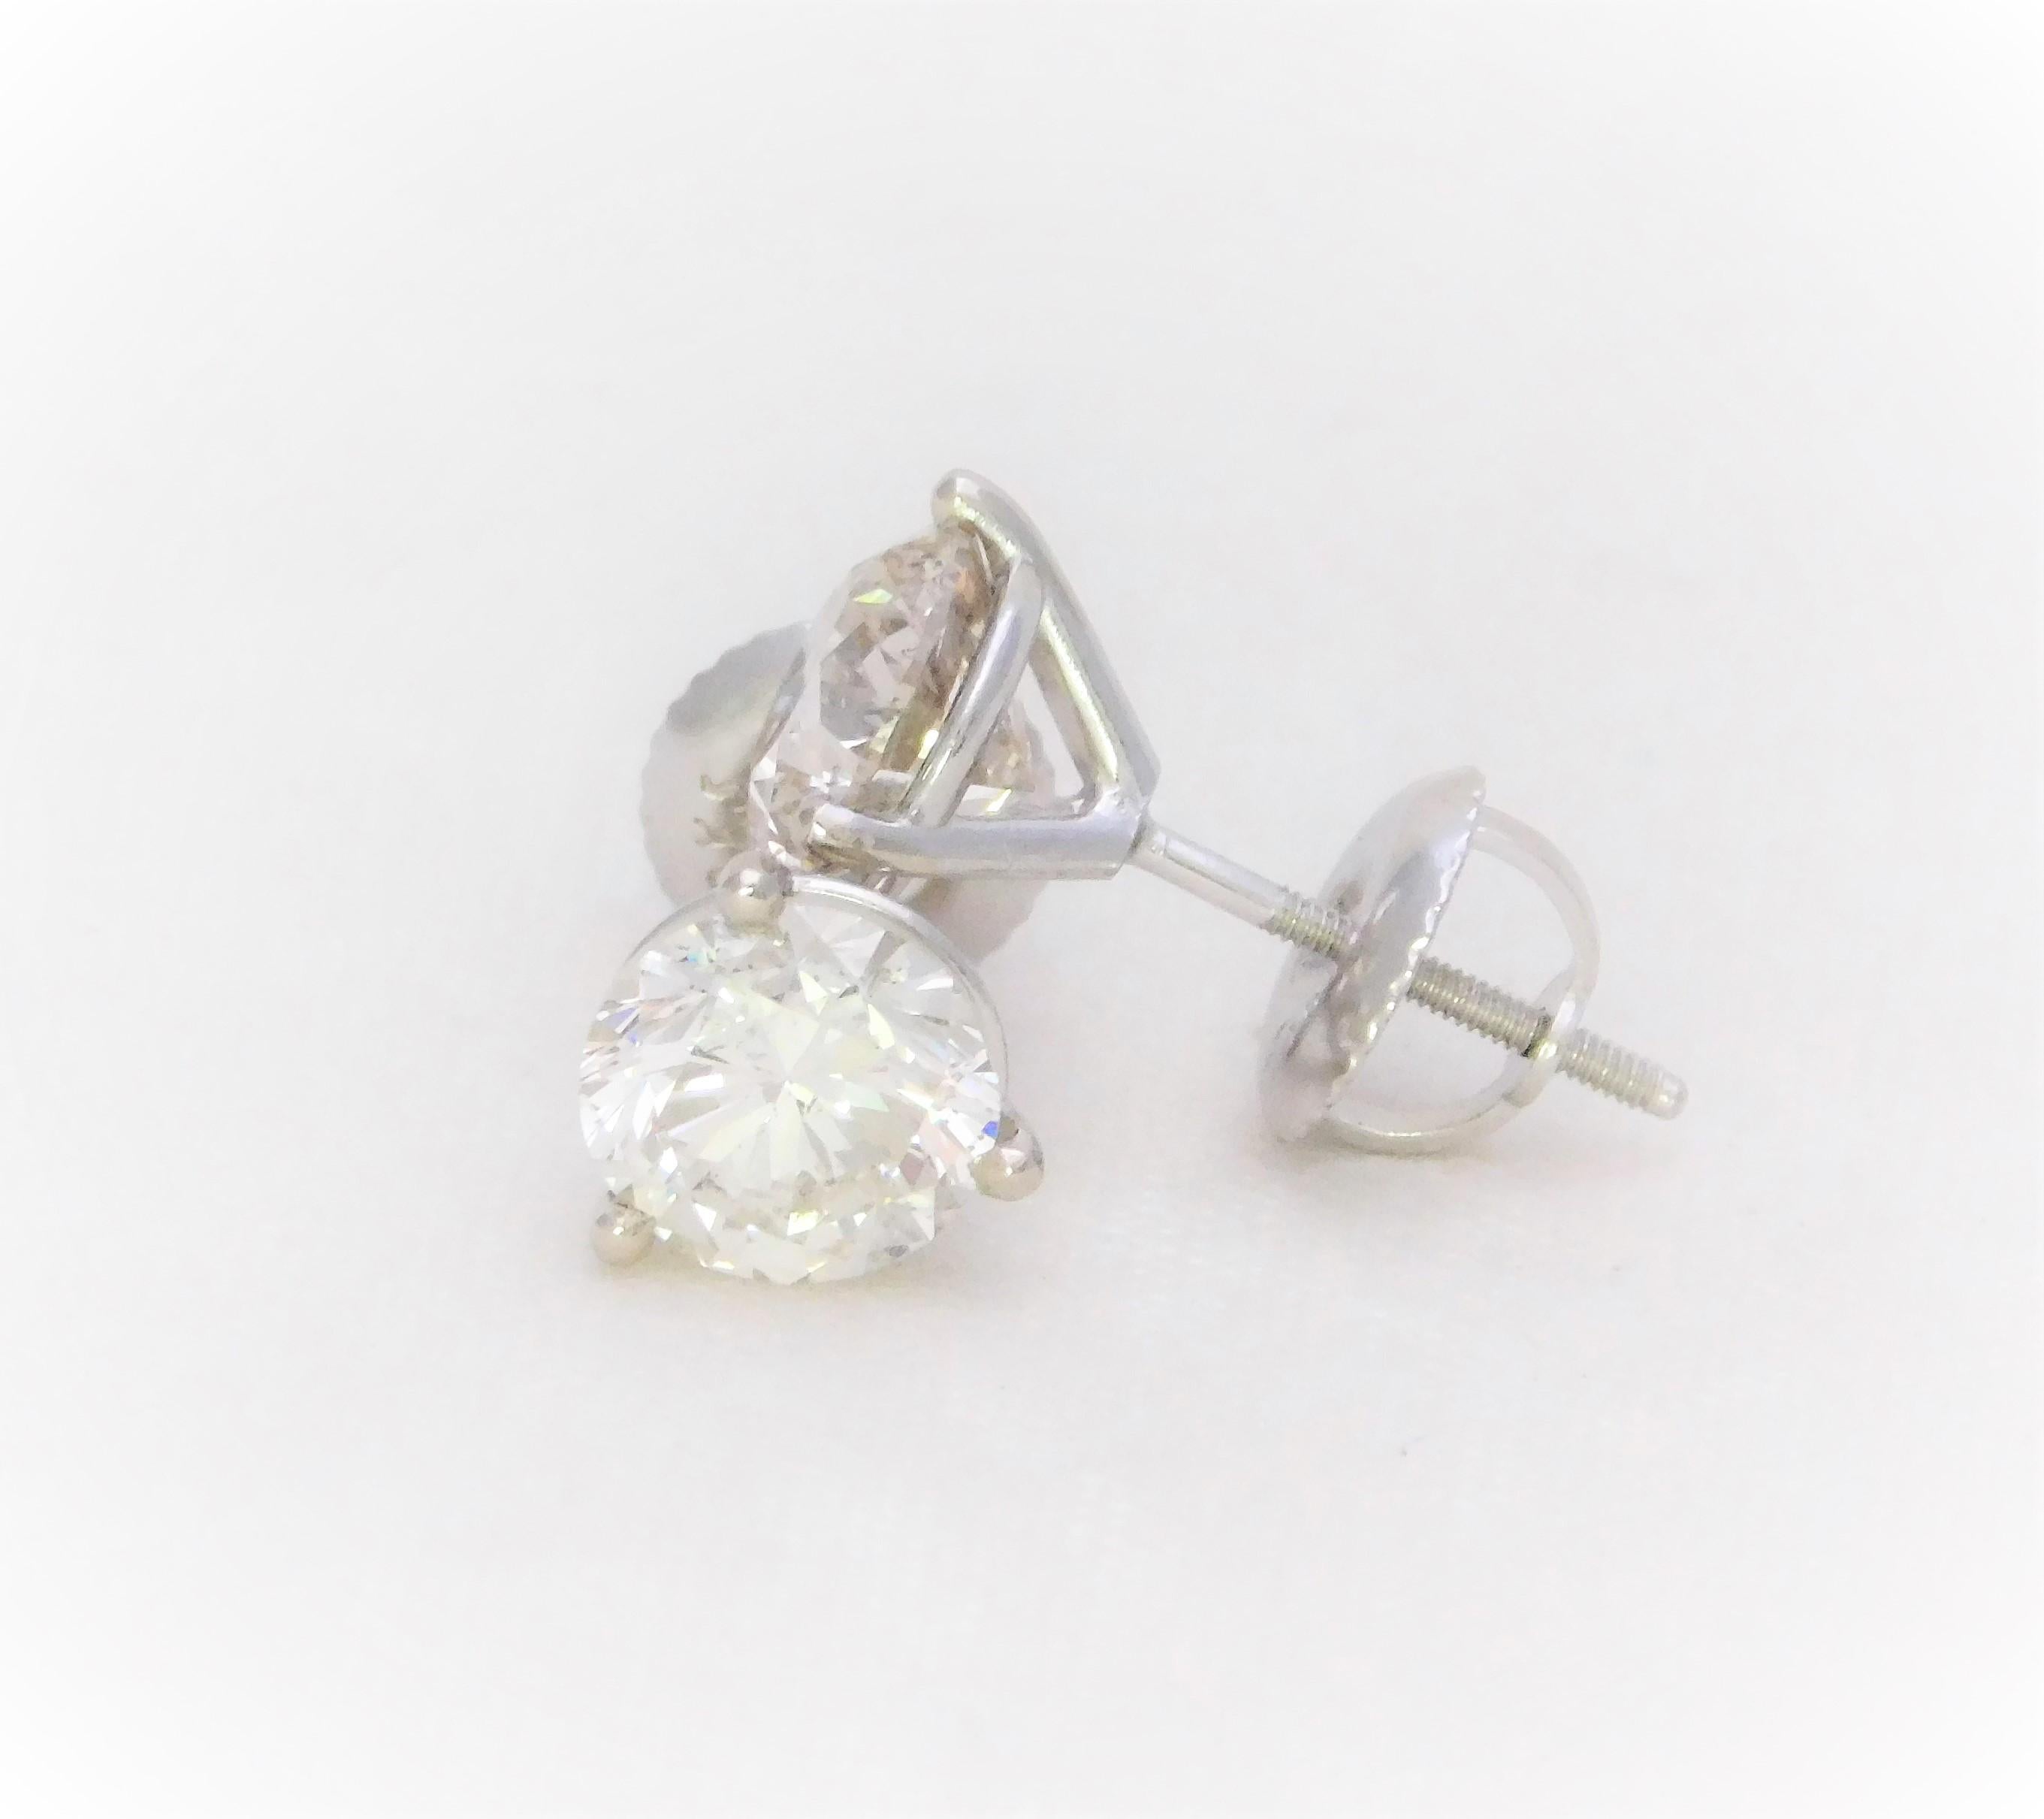 Next to a diamond engagement ring, the set of diamond stud earrings represents the most important staple in an elegant ladies’ wardrobe. 
Custom-made, brand new, and never worn.  This set of lovely diamond stud earrings have been crafted in solid